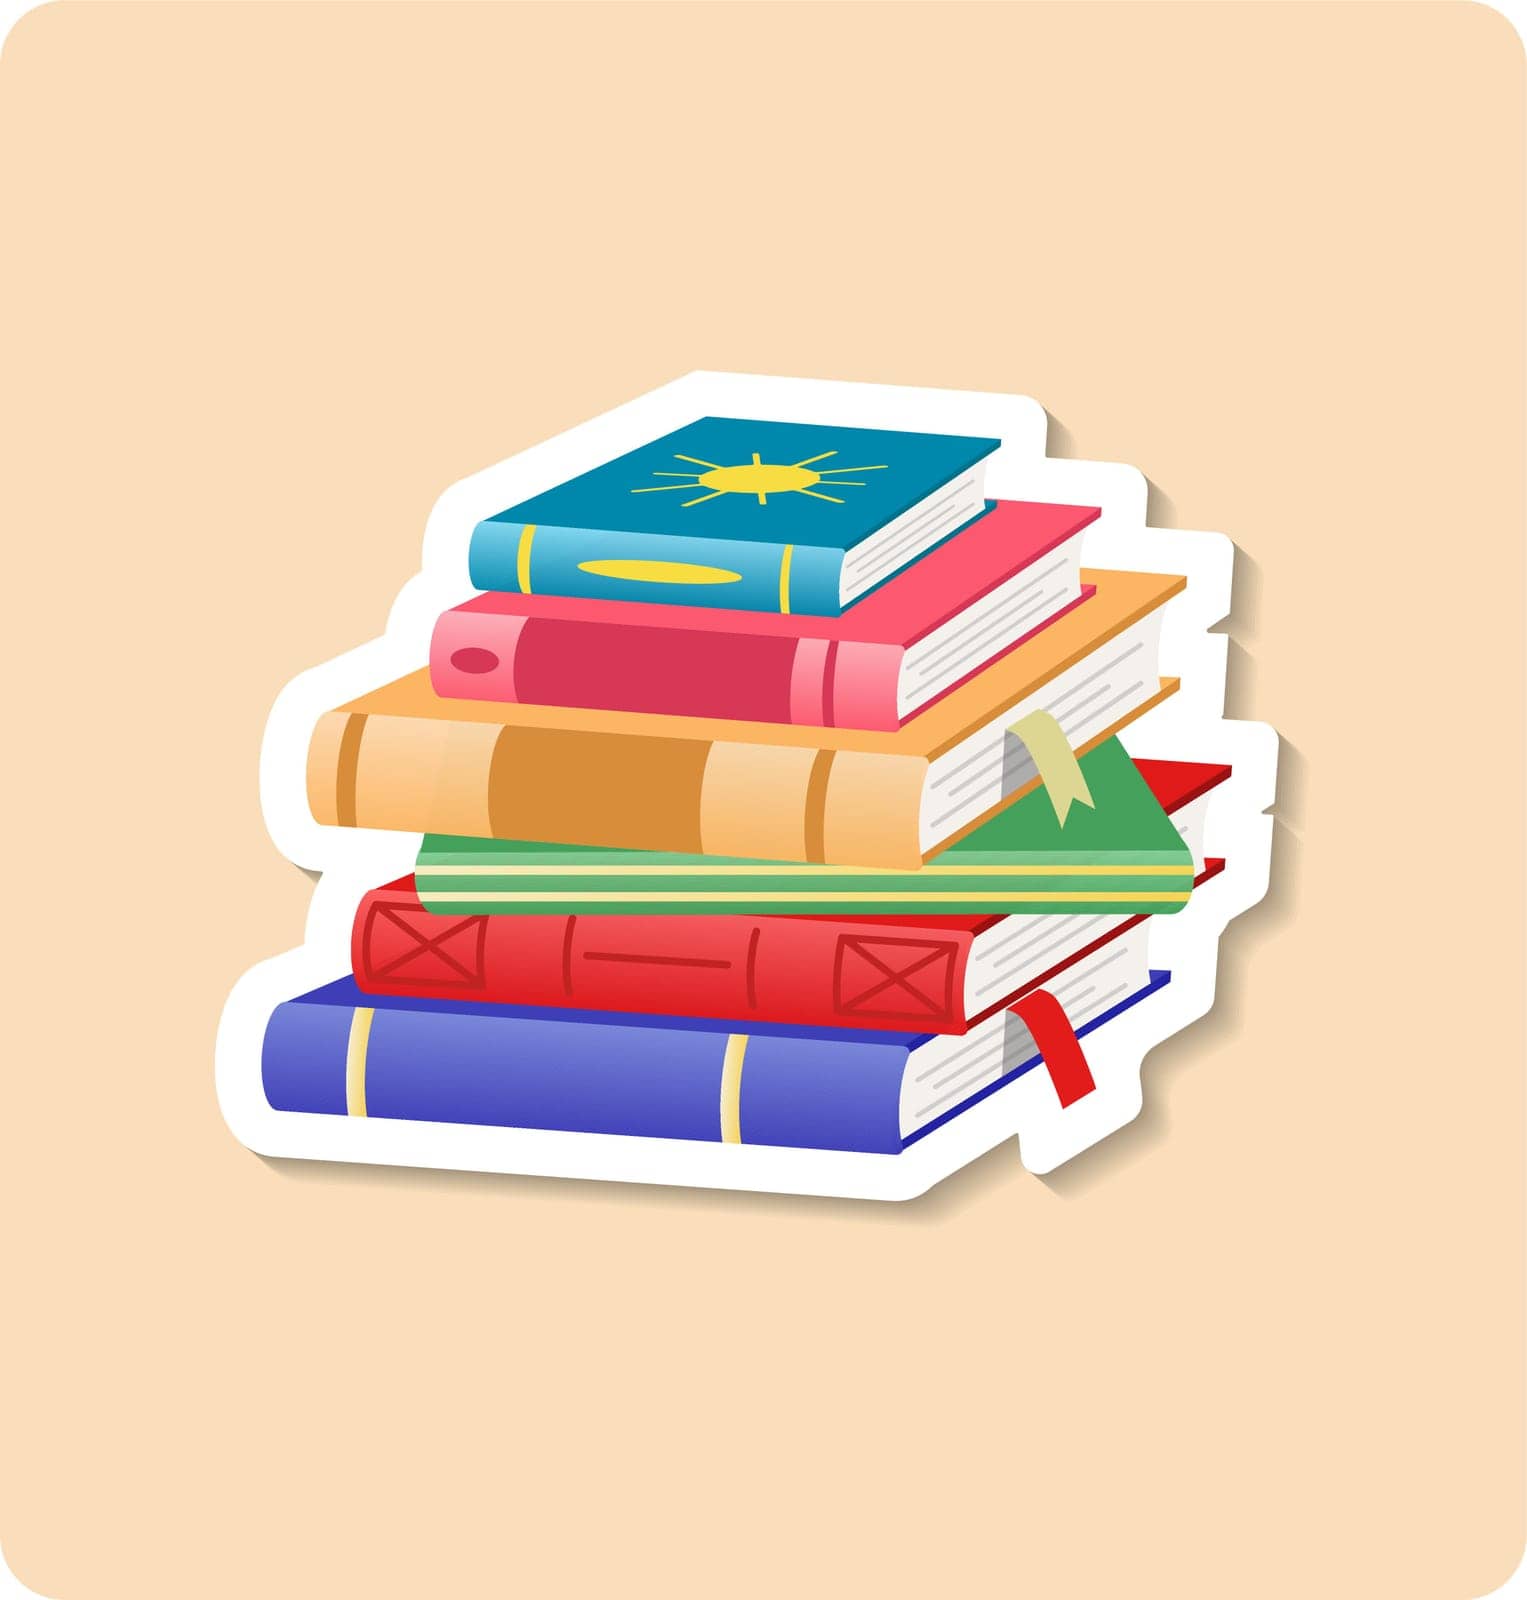 Books sticker illustration. Book, stack, bookmark, variety. Editable vector graphic design. by simakovavector